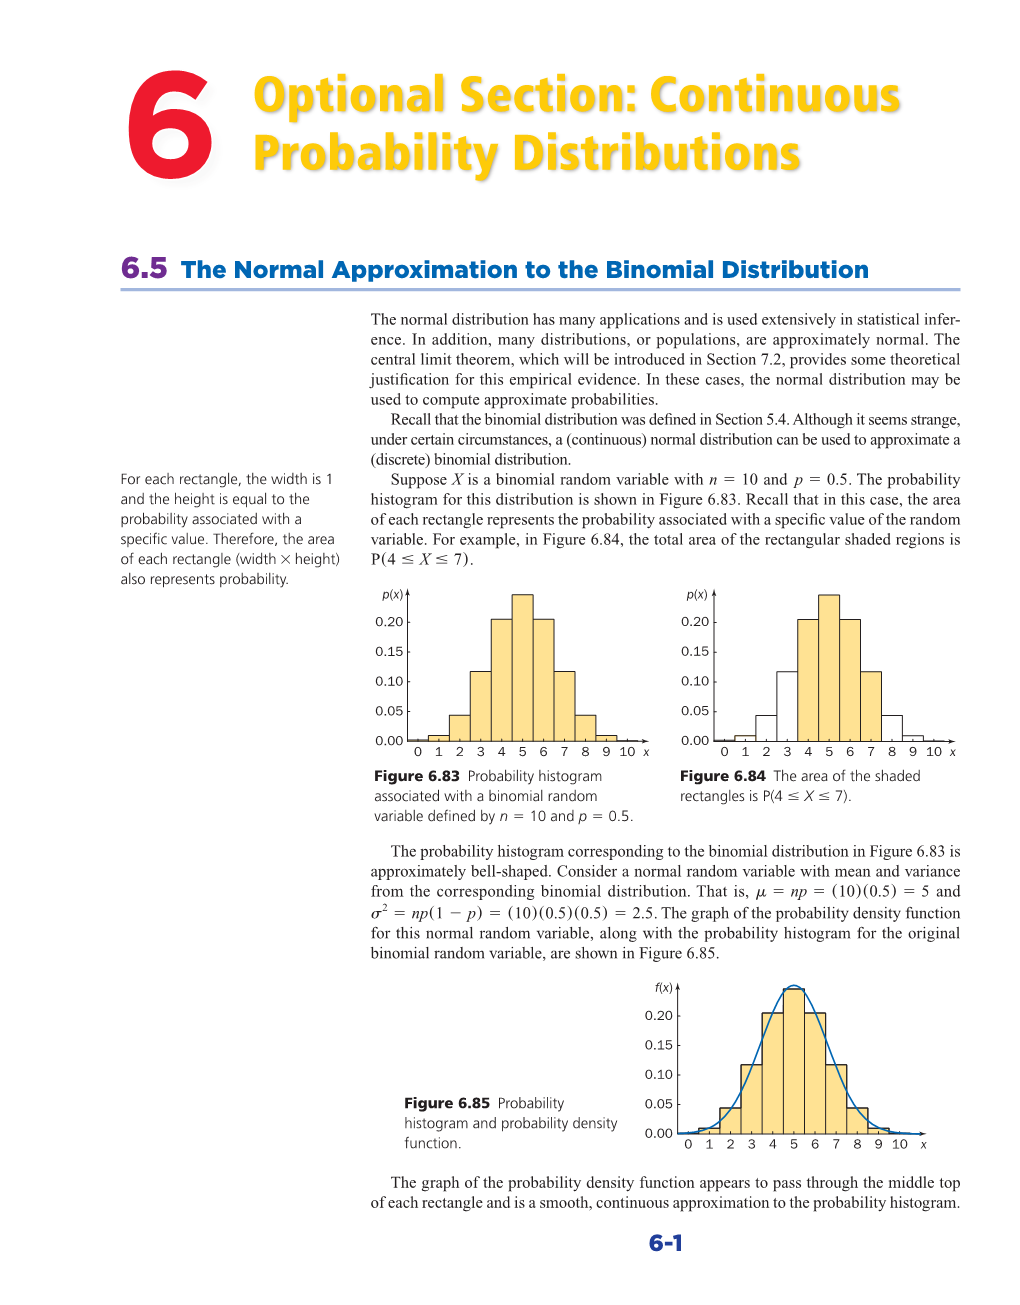 Optional Section: Continuous Probability Distributions